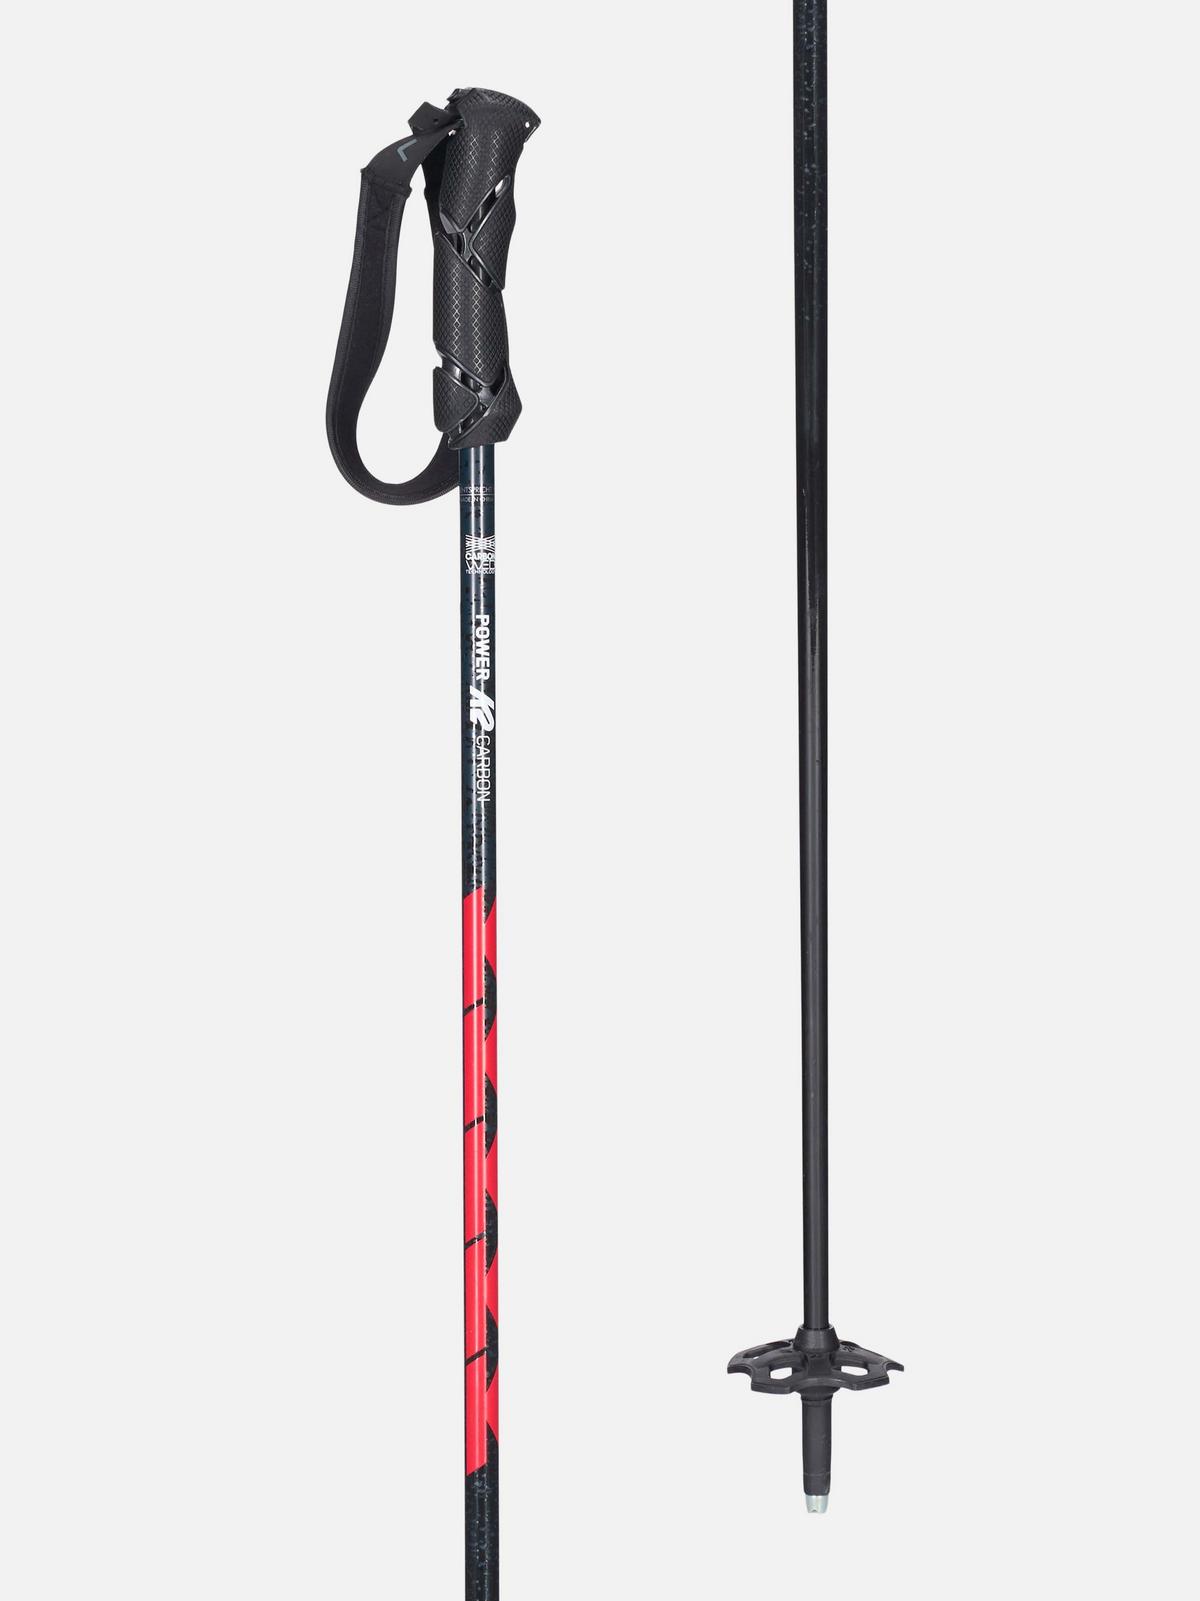 Power Carbon Pole  K2 Skis and K2 Snowboarding